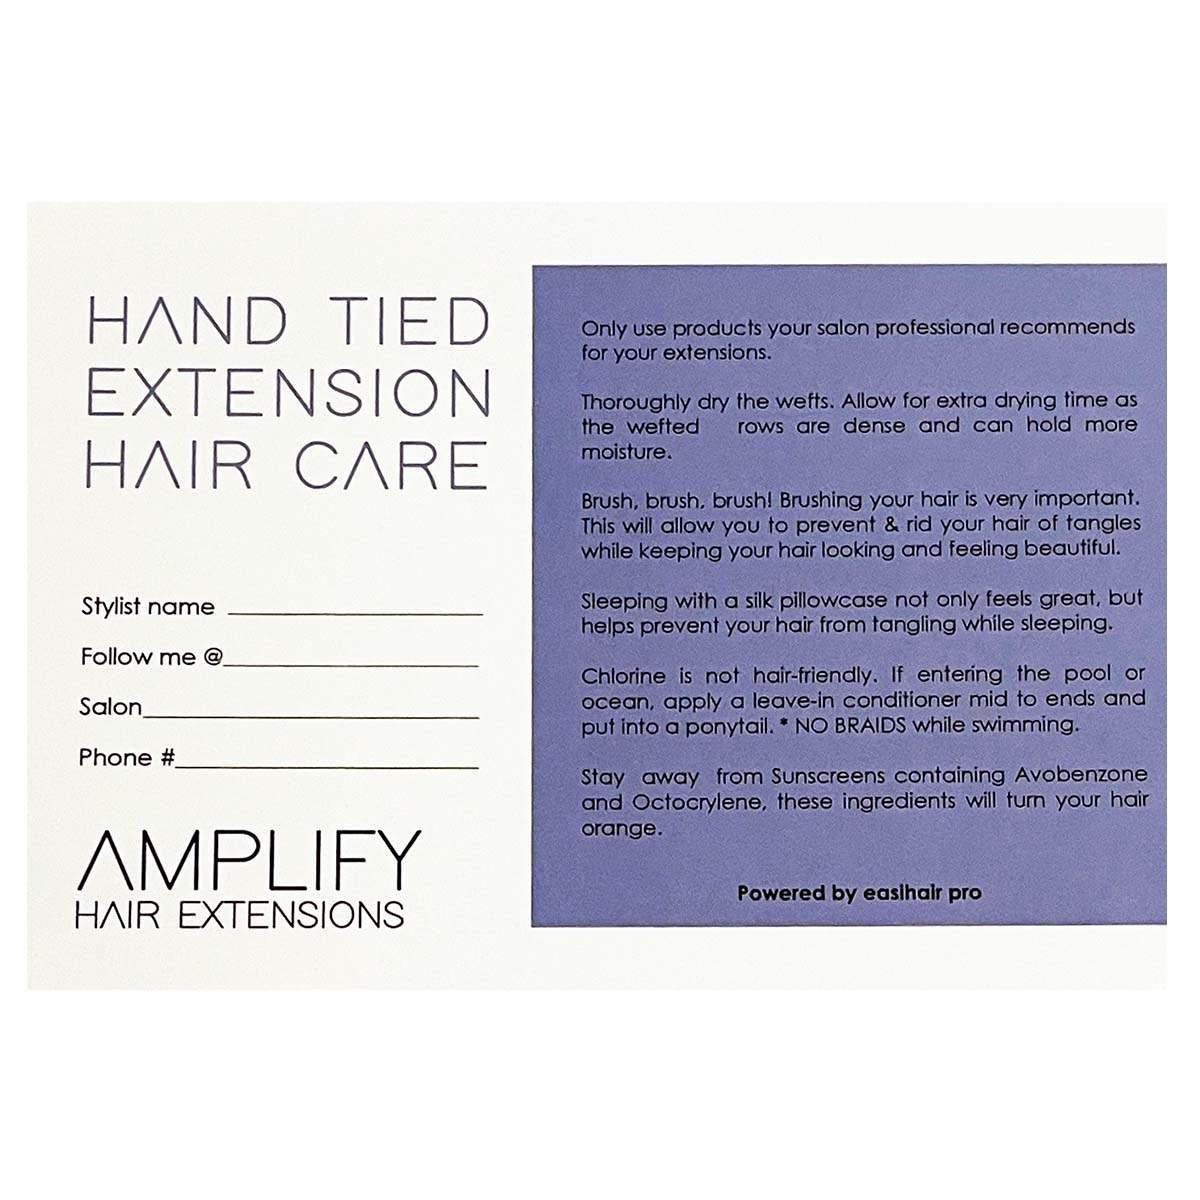 Amplify Home Care 101 Card